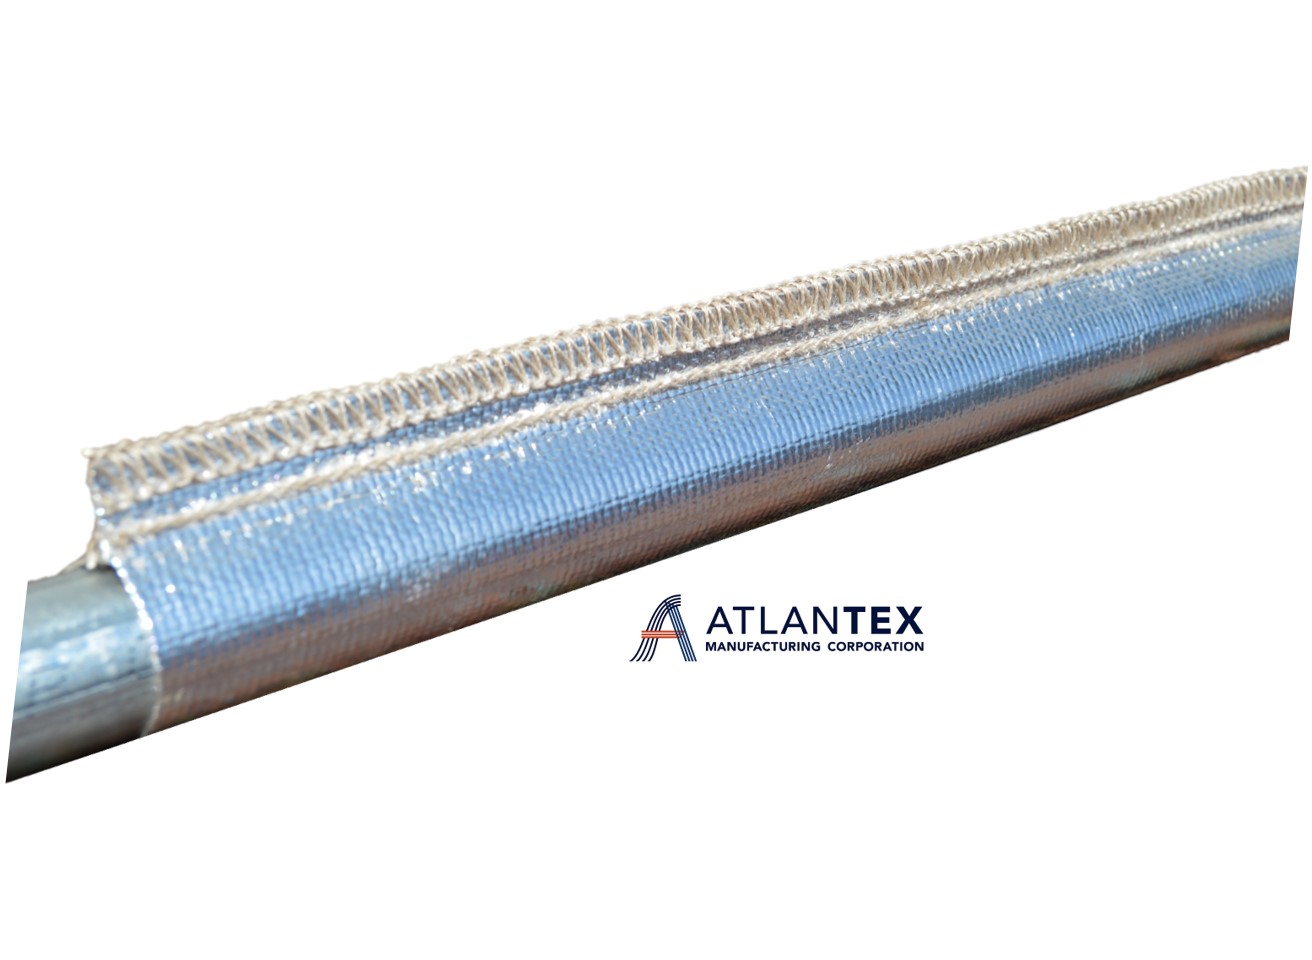 2 1/2 x 10 2 1/2 x 10' ATLANTEX RT40800-20-10 STS Reflect-Therm STS Sewn Reflective Sleeving